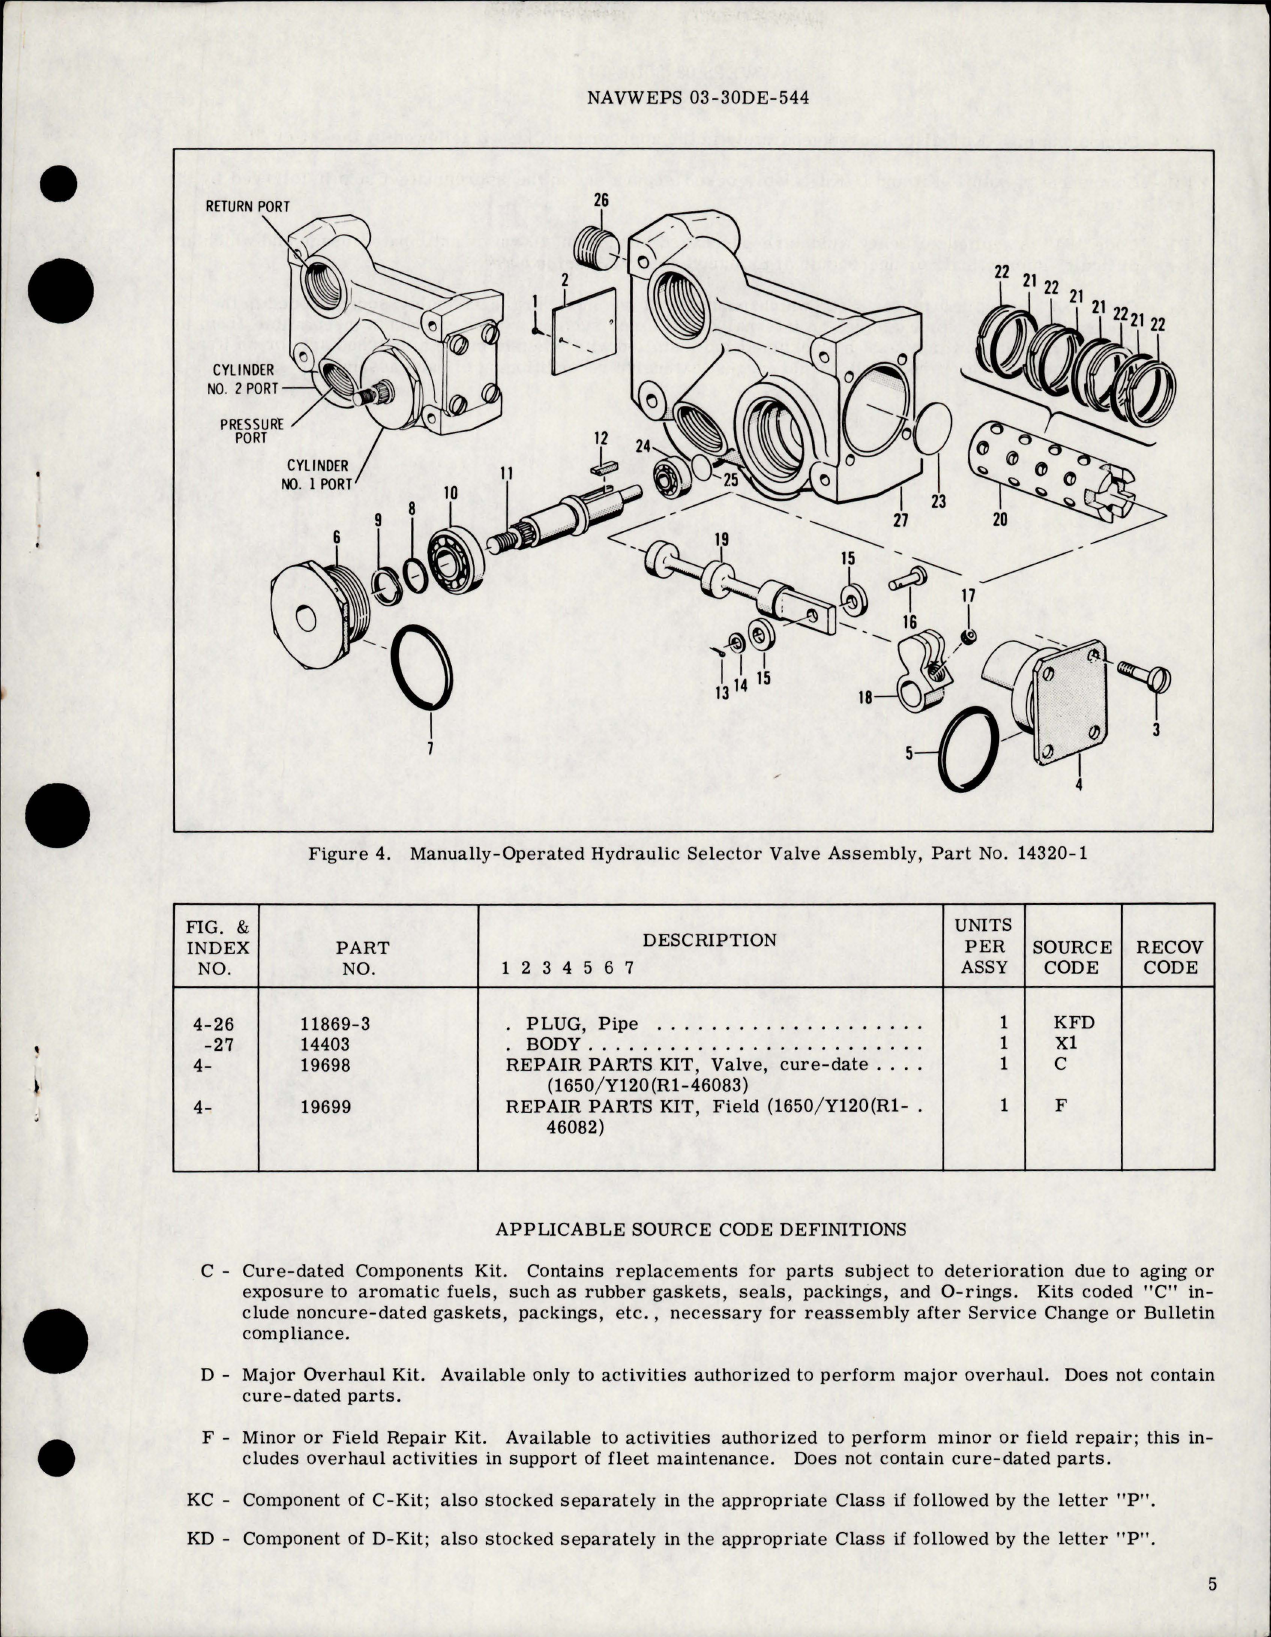 Sample page 5 from AirCorps Library document: Overhaul Instructions with Parts Breakdown for Manually Operated Hydraulic Selector Valve - Part 14320-1